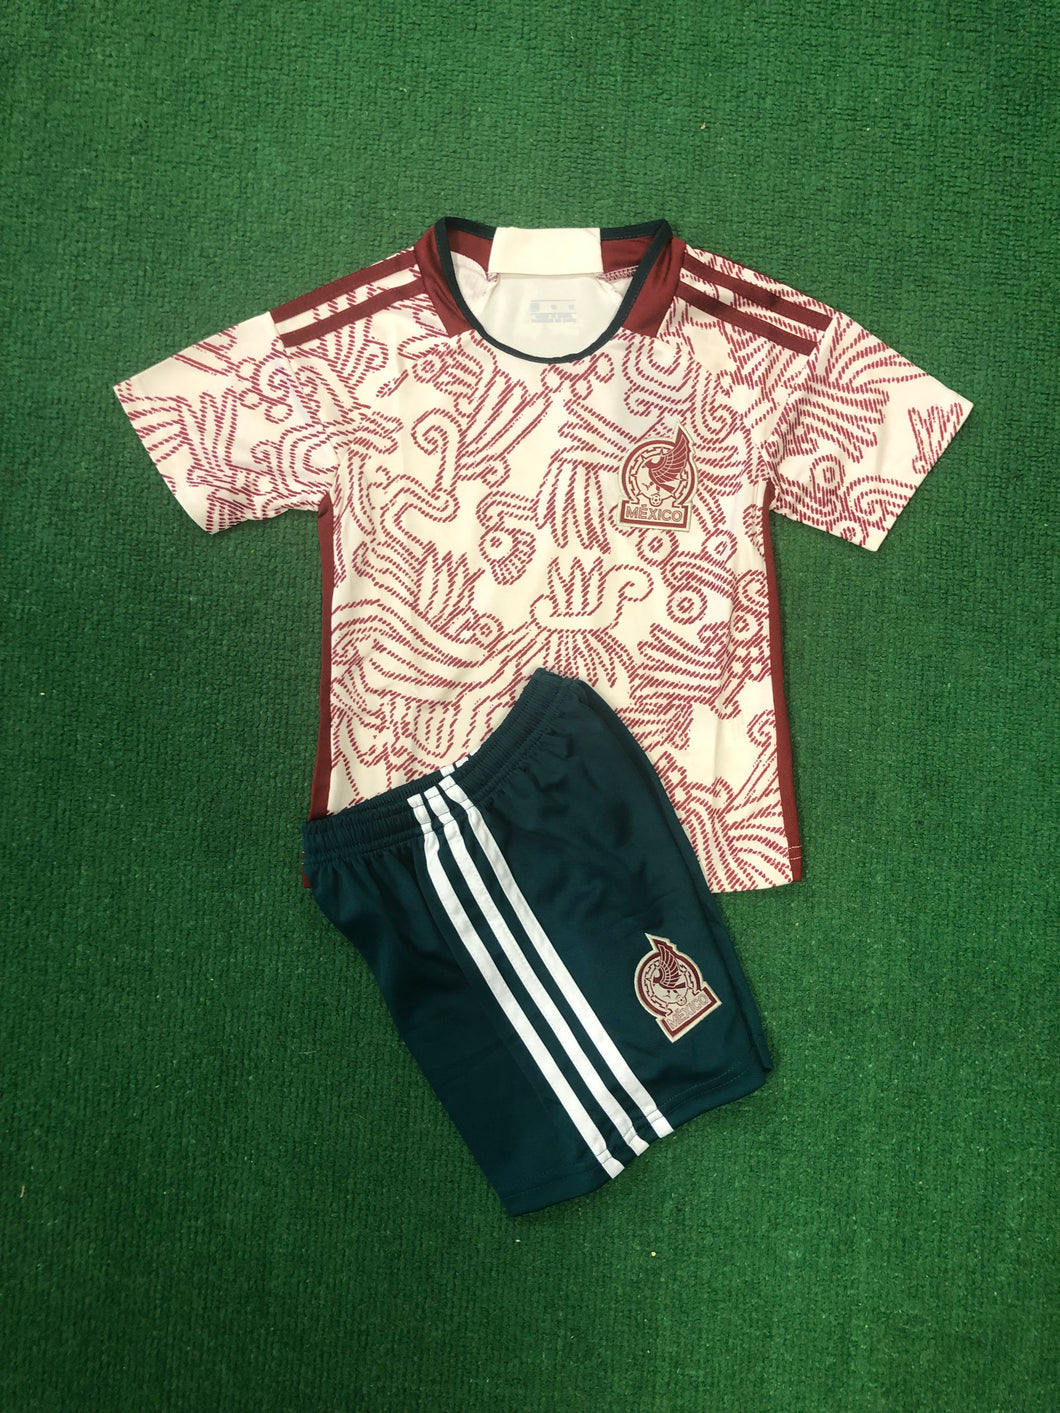 Mexico 2022 World Cup Youth Away Kit